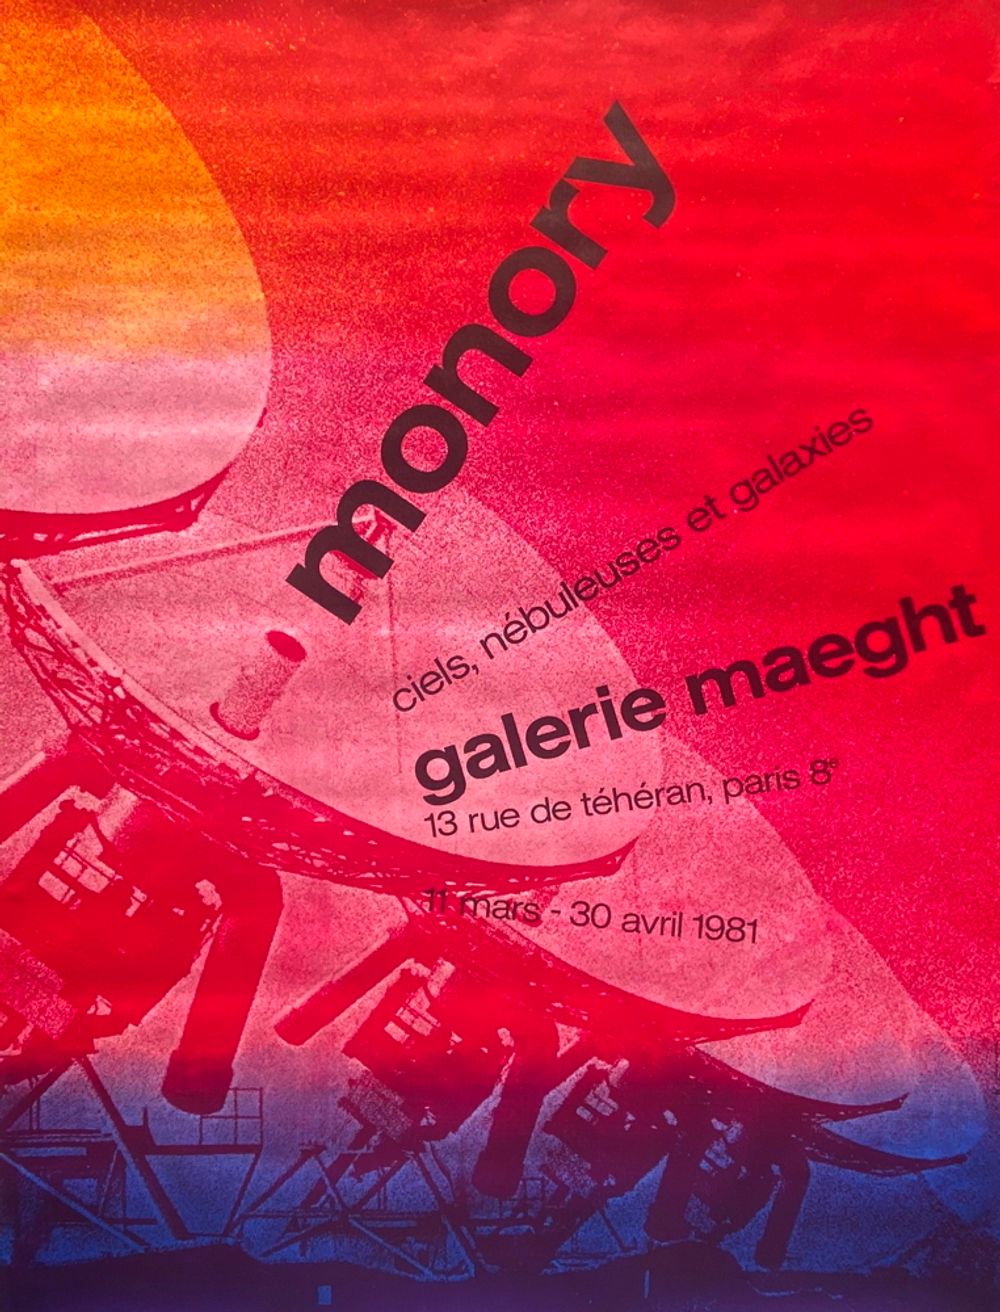 Expo 81 - Galerie Maeght